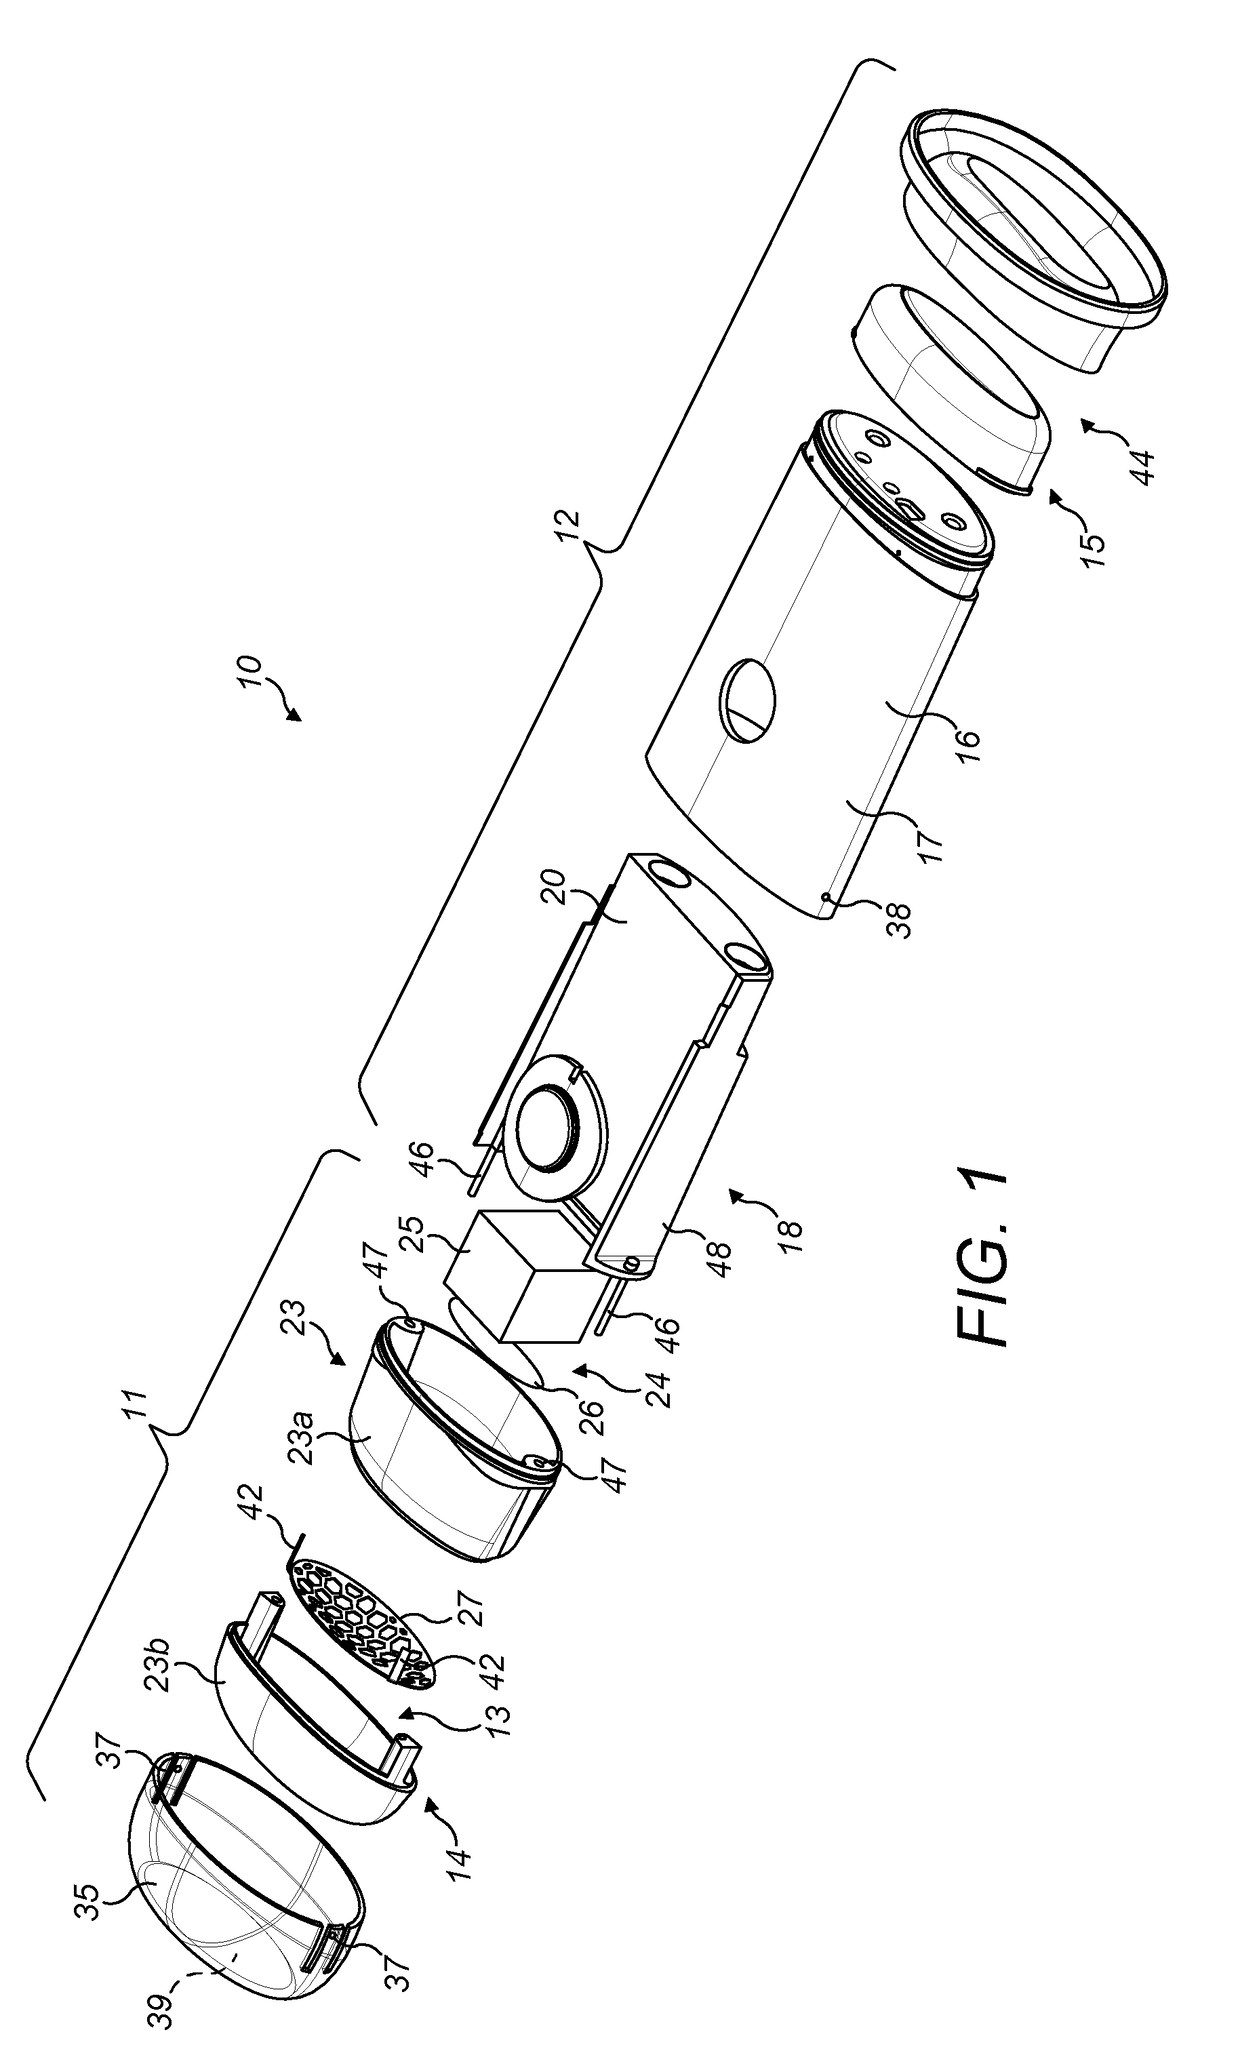 A device for treating skin using non-thermal plasma